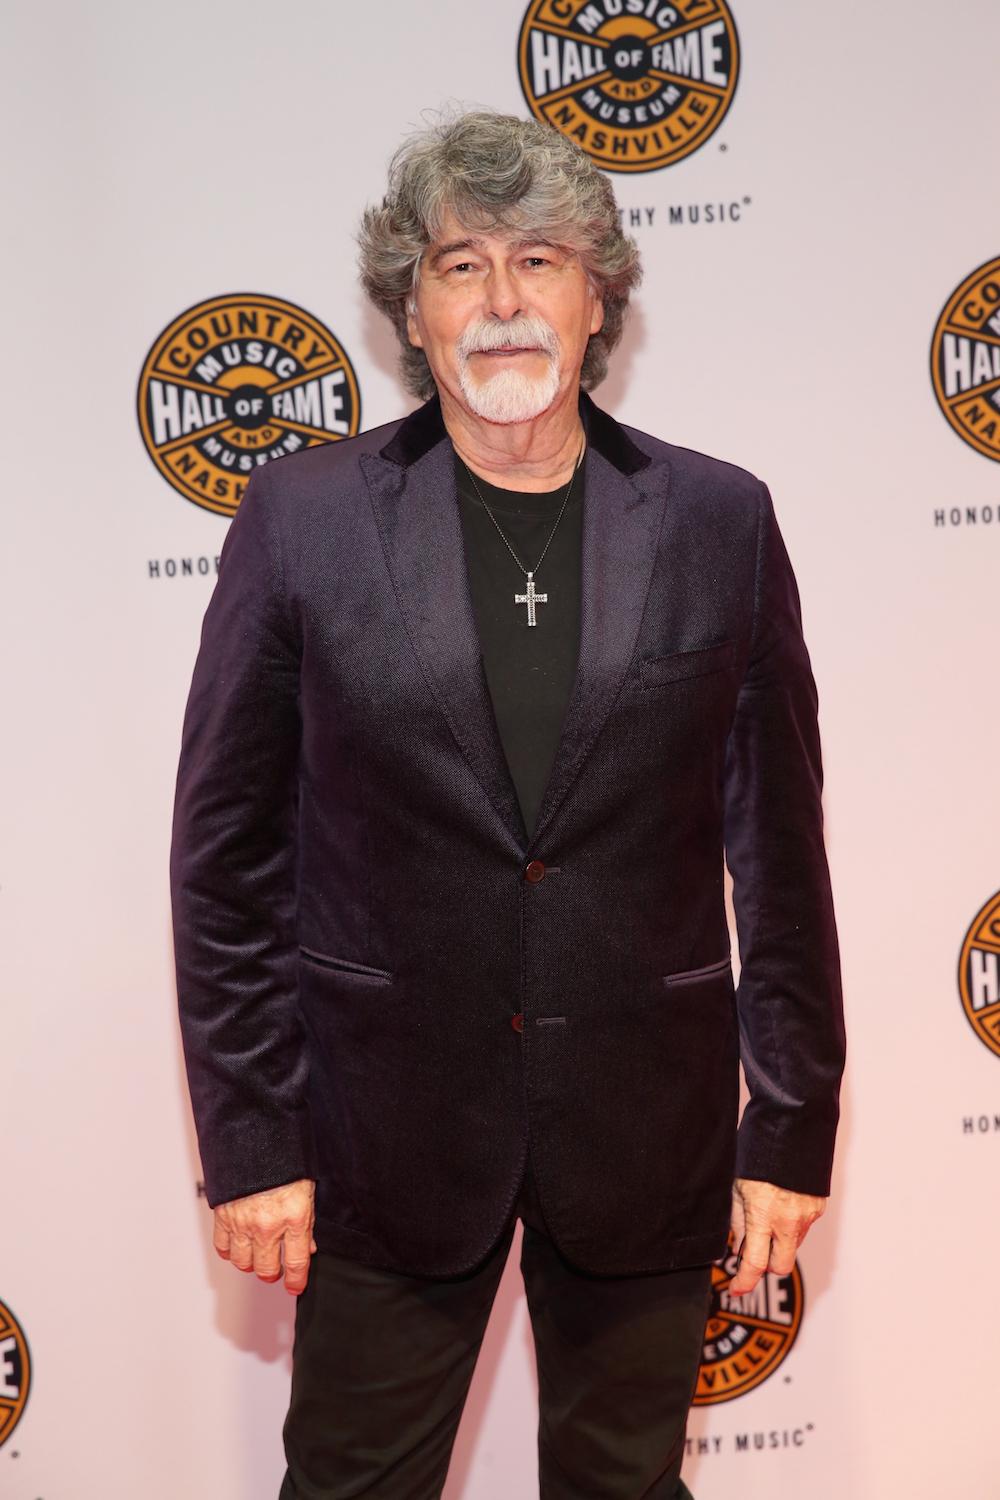 Randy Owen at the Country Music Hall of Fame and Museum in Nashville, Tennessee, on Oct. 22, 2017 (©Getty Images | <a href="https://www.gettyimages.com/detail/news-photo/randy-owen-of-musical-group-alabama-attends-medallion-news-photo/865158326?adppopup=true">Terry Wyatt</a>)